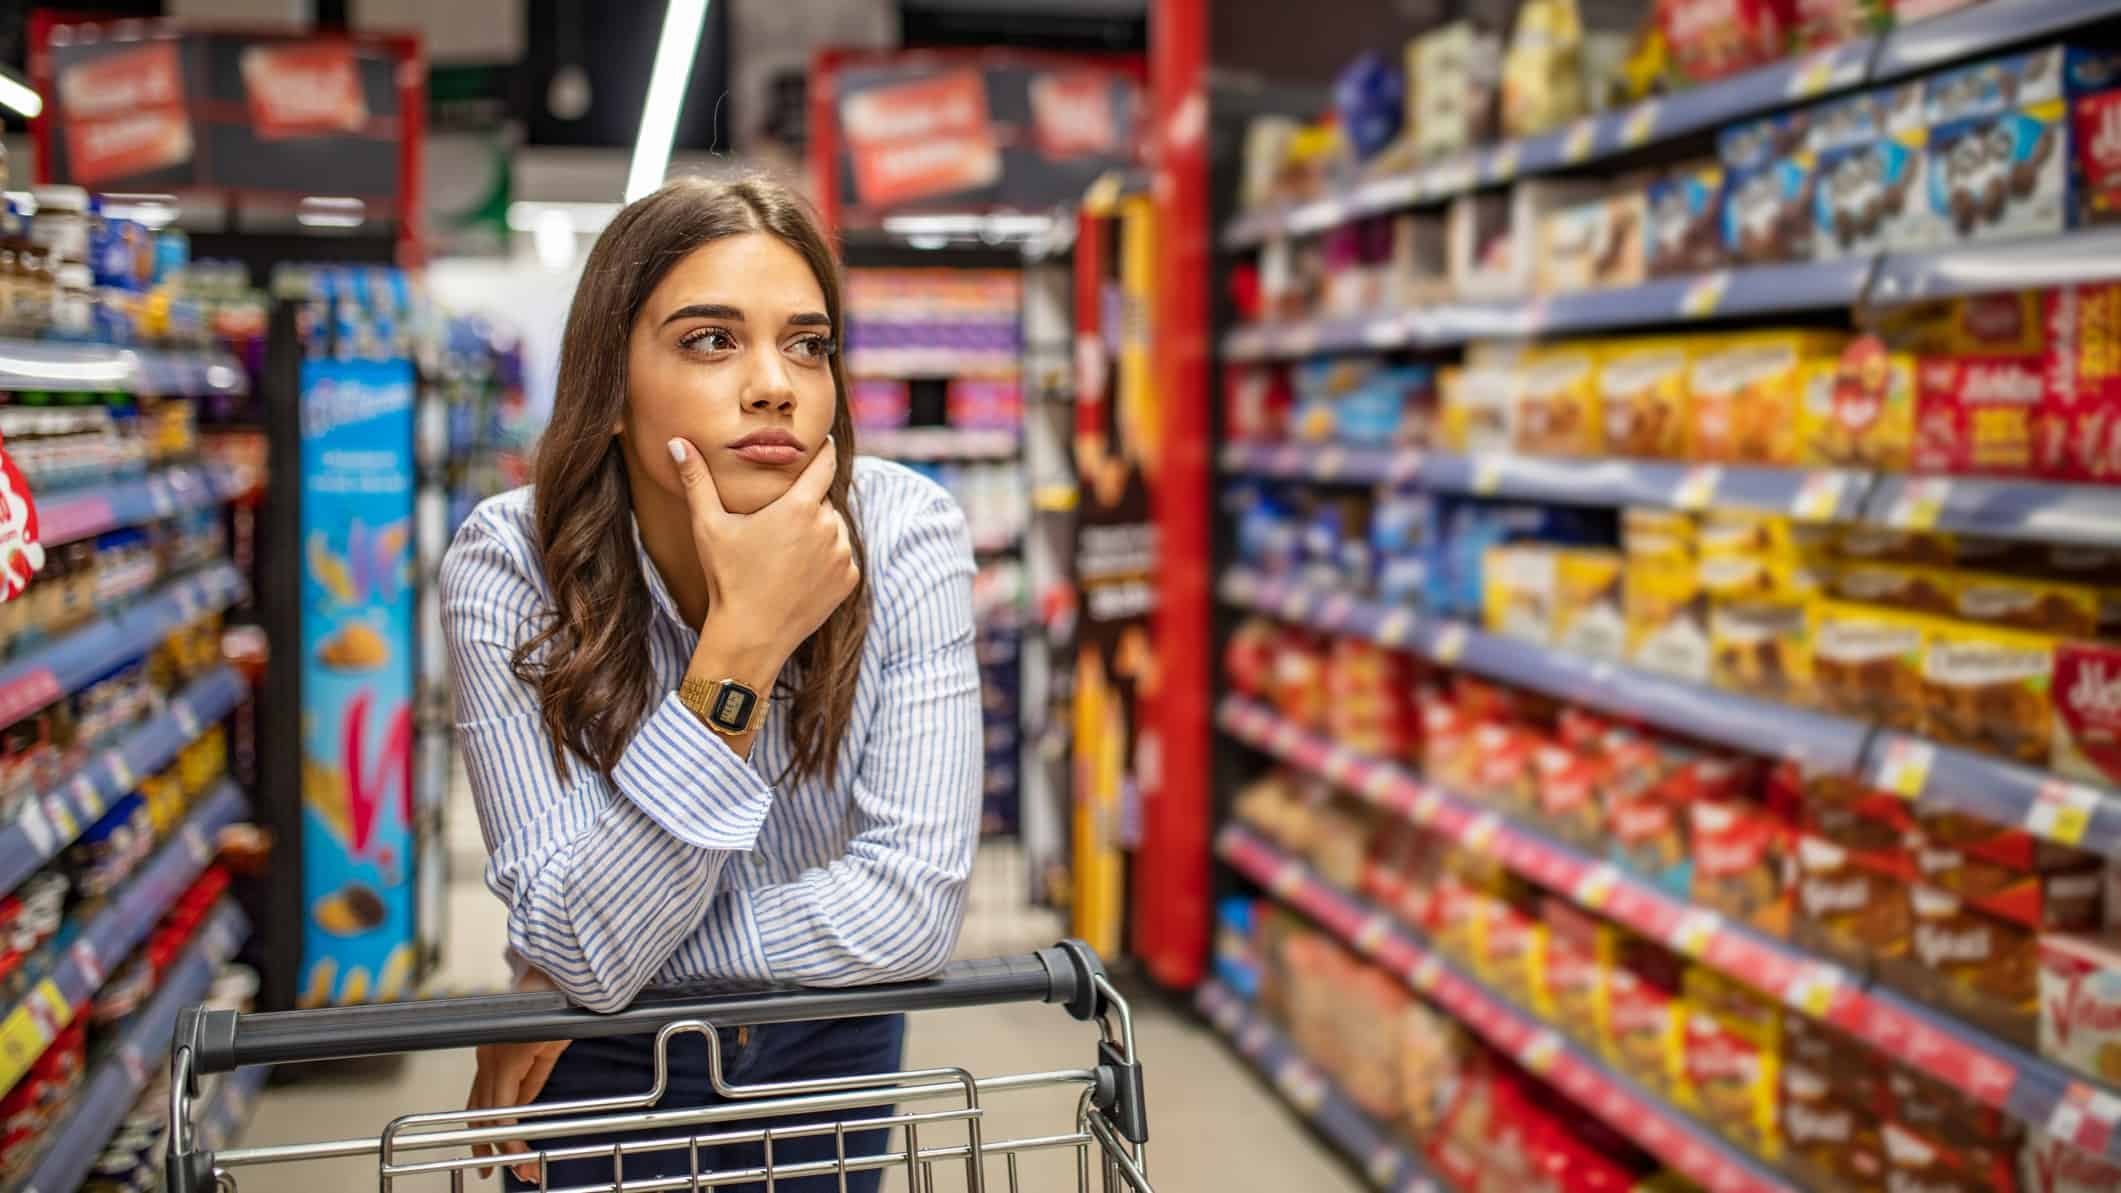 A female Woolworths customer leans on her shopping trolley as she rests her chin in her hand thinking about what to buy for dinner while also wondering why the Woolworths share price isn't doing as well as Coles recently